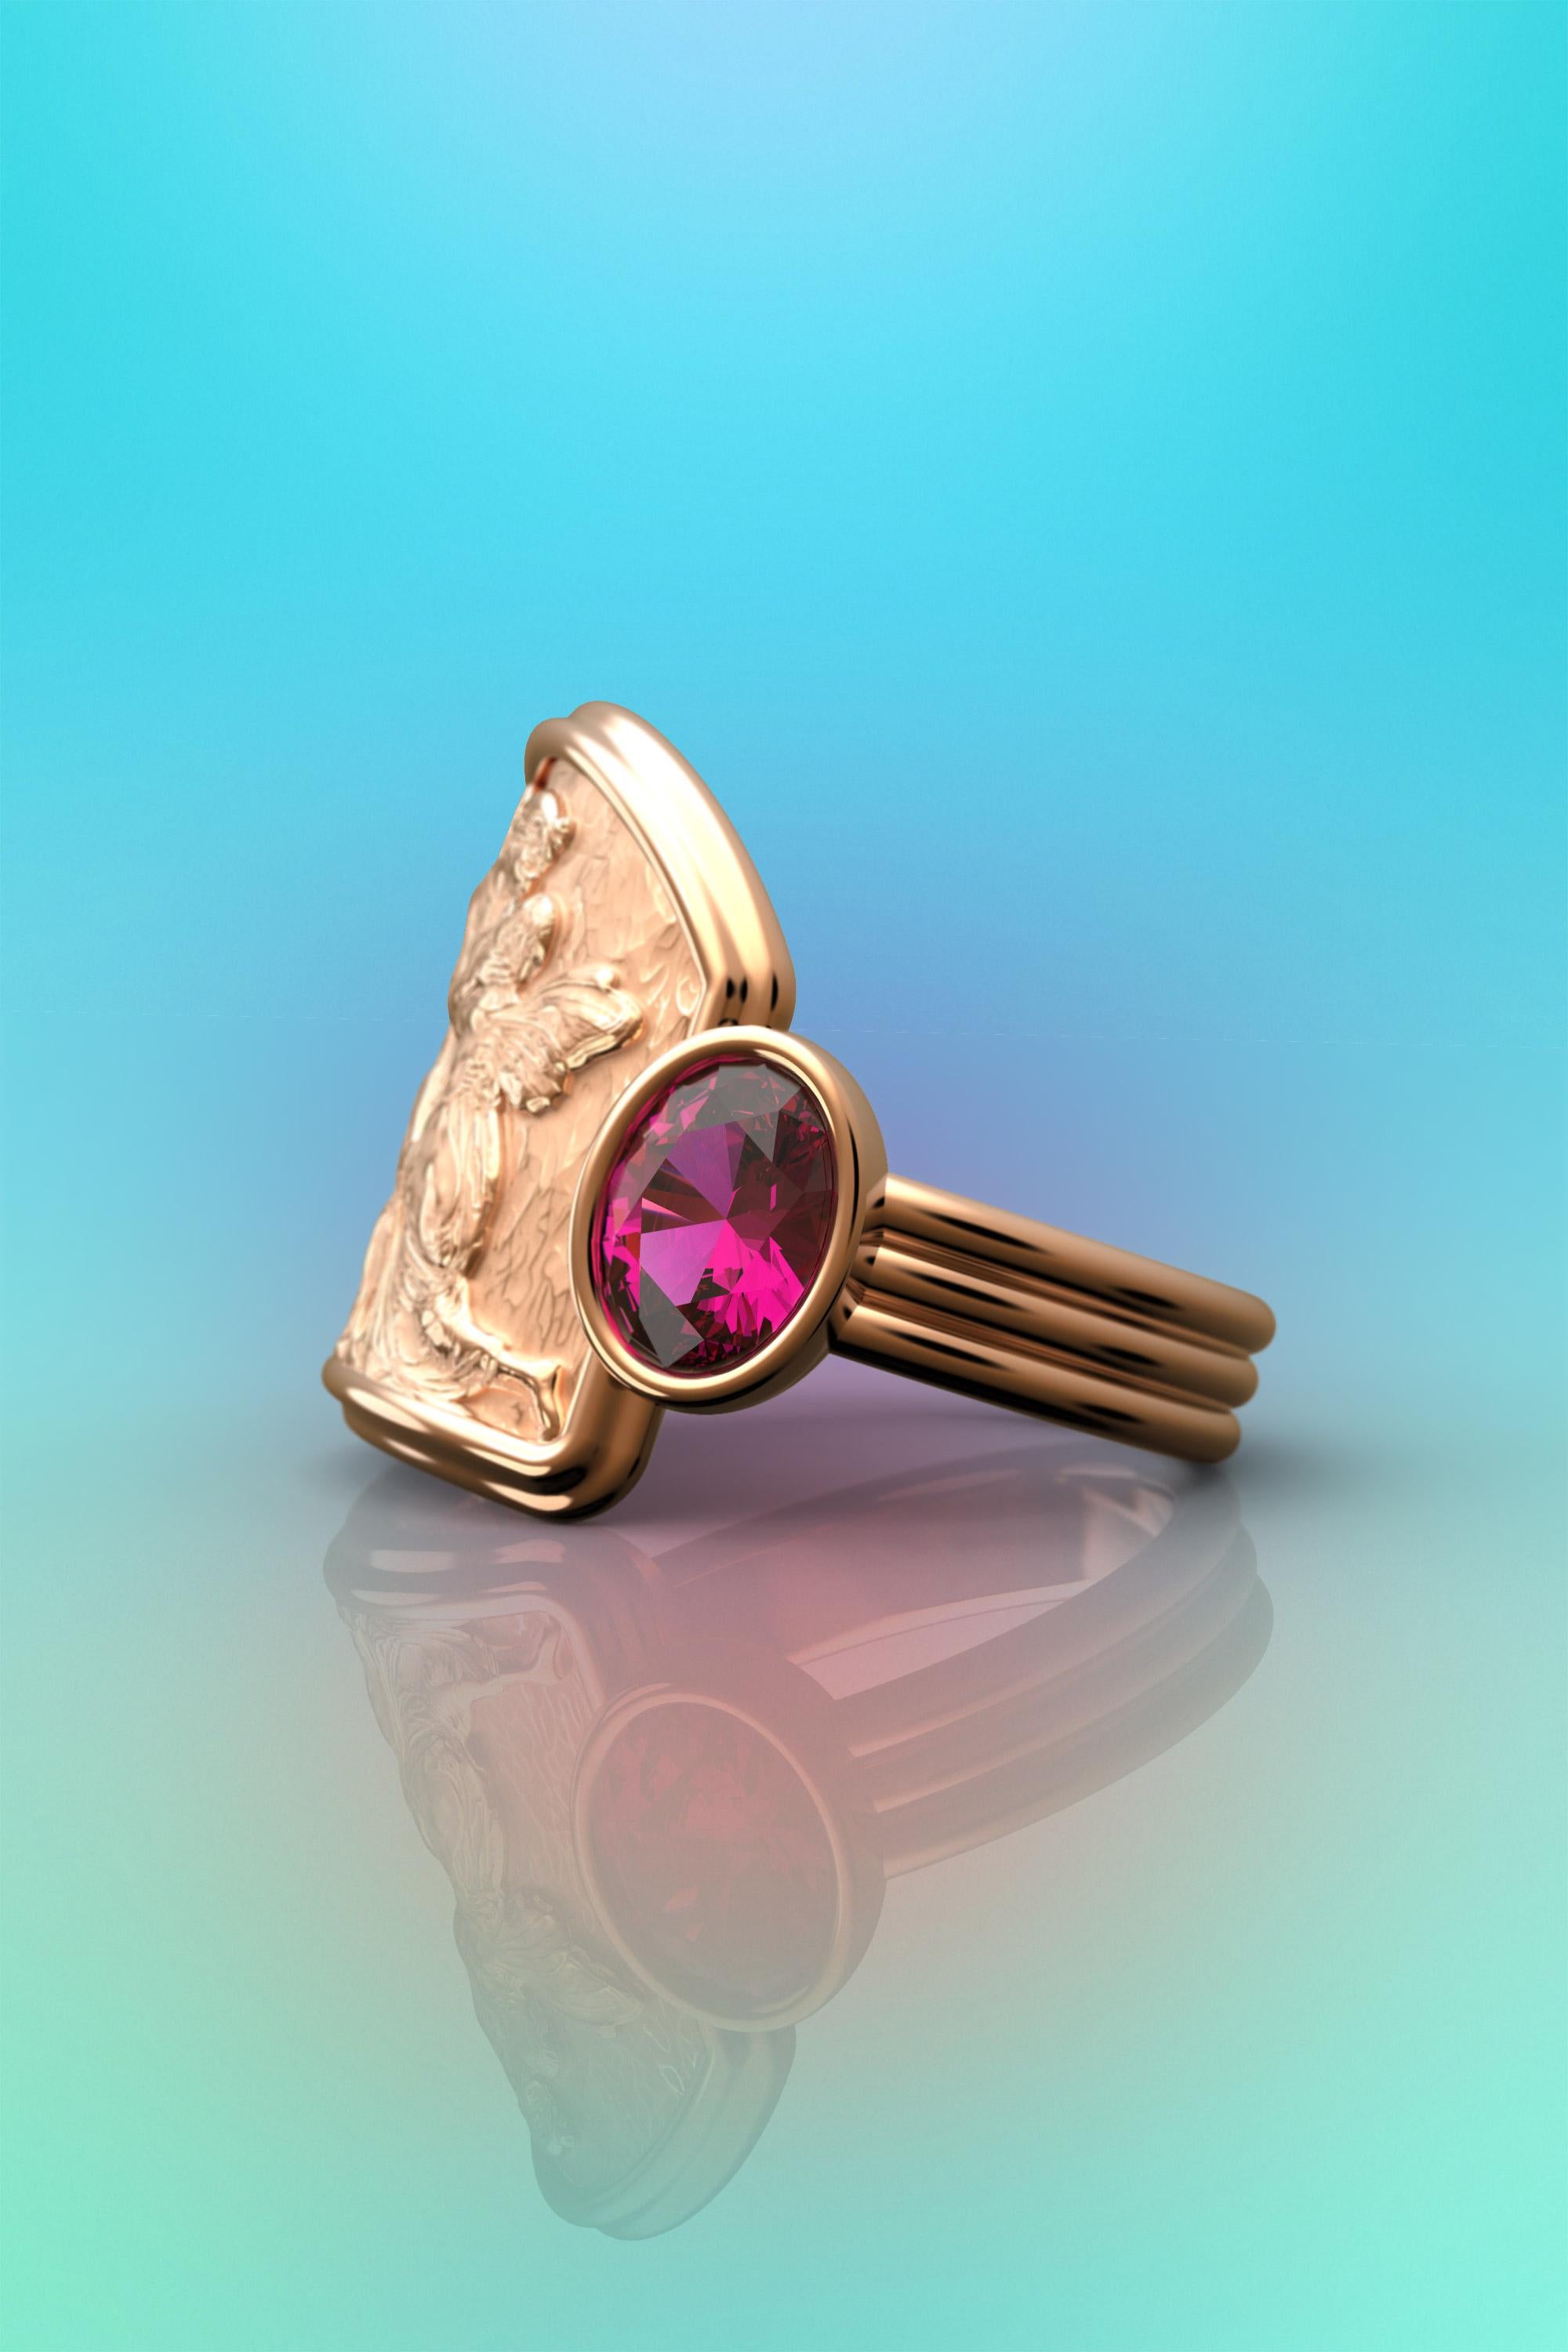 For Sale:  Oltremare Gioielli Sculptural Ring, Love and Psyche 18k Gold Ring, Italian Gold 5